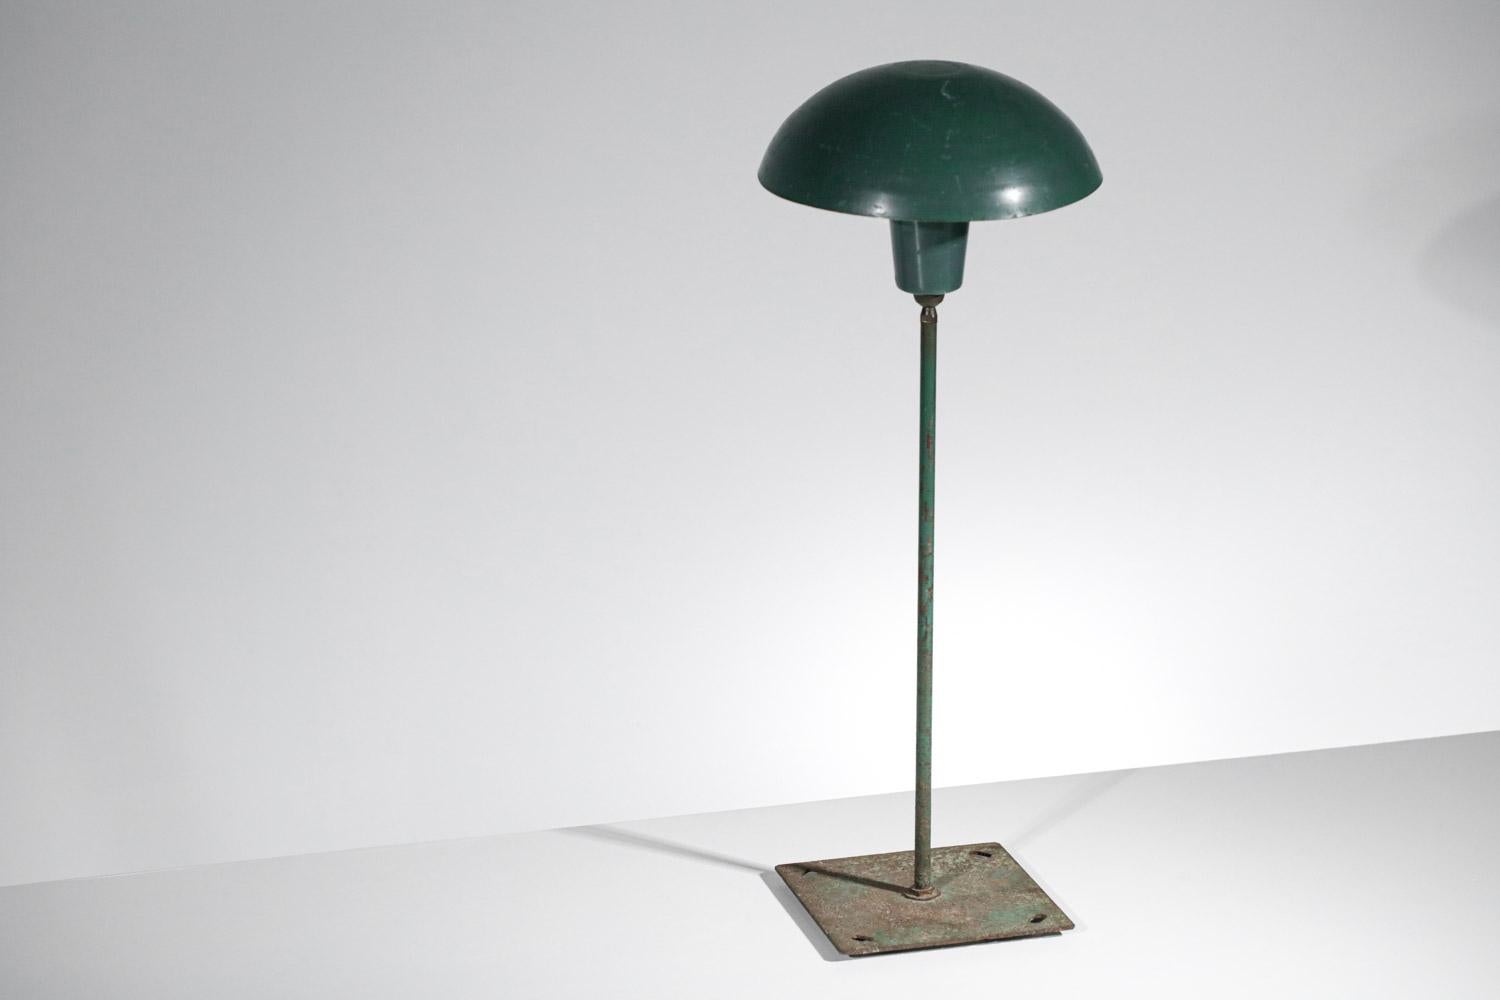 Danish Outdoor Table Lamp in Lacquered Metal 50s Style Poul Hennigsen For Sale 3